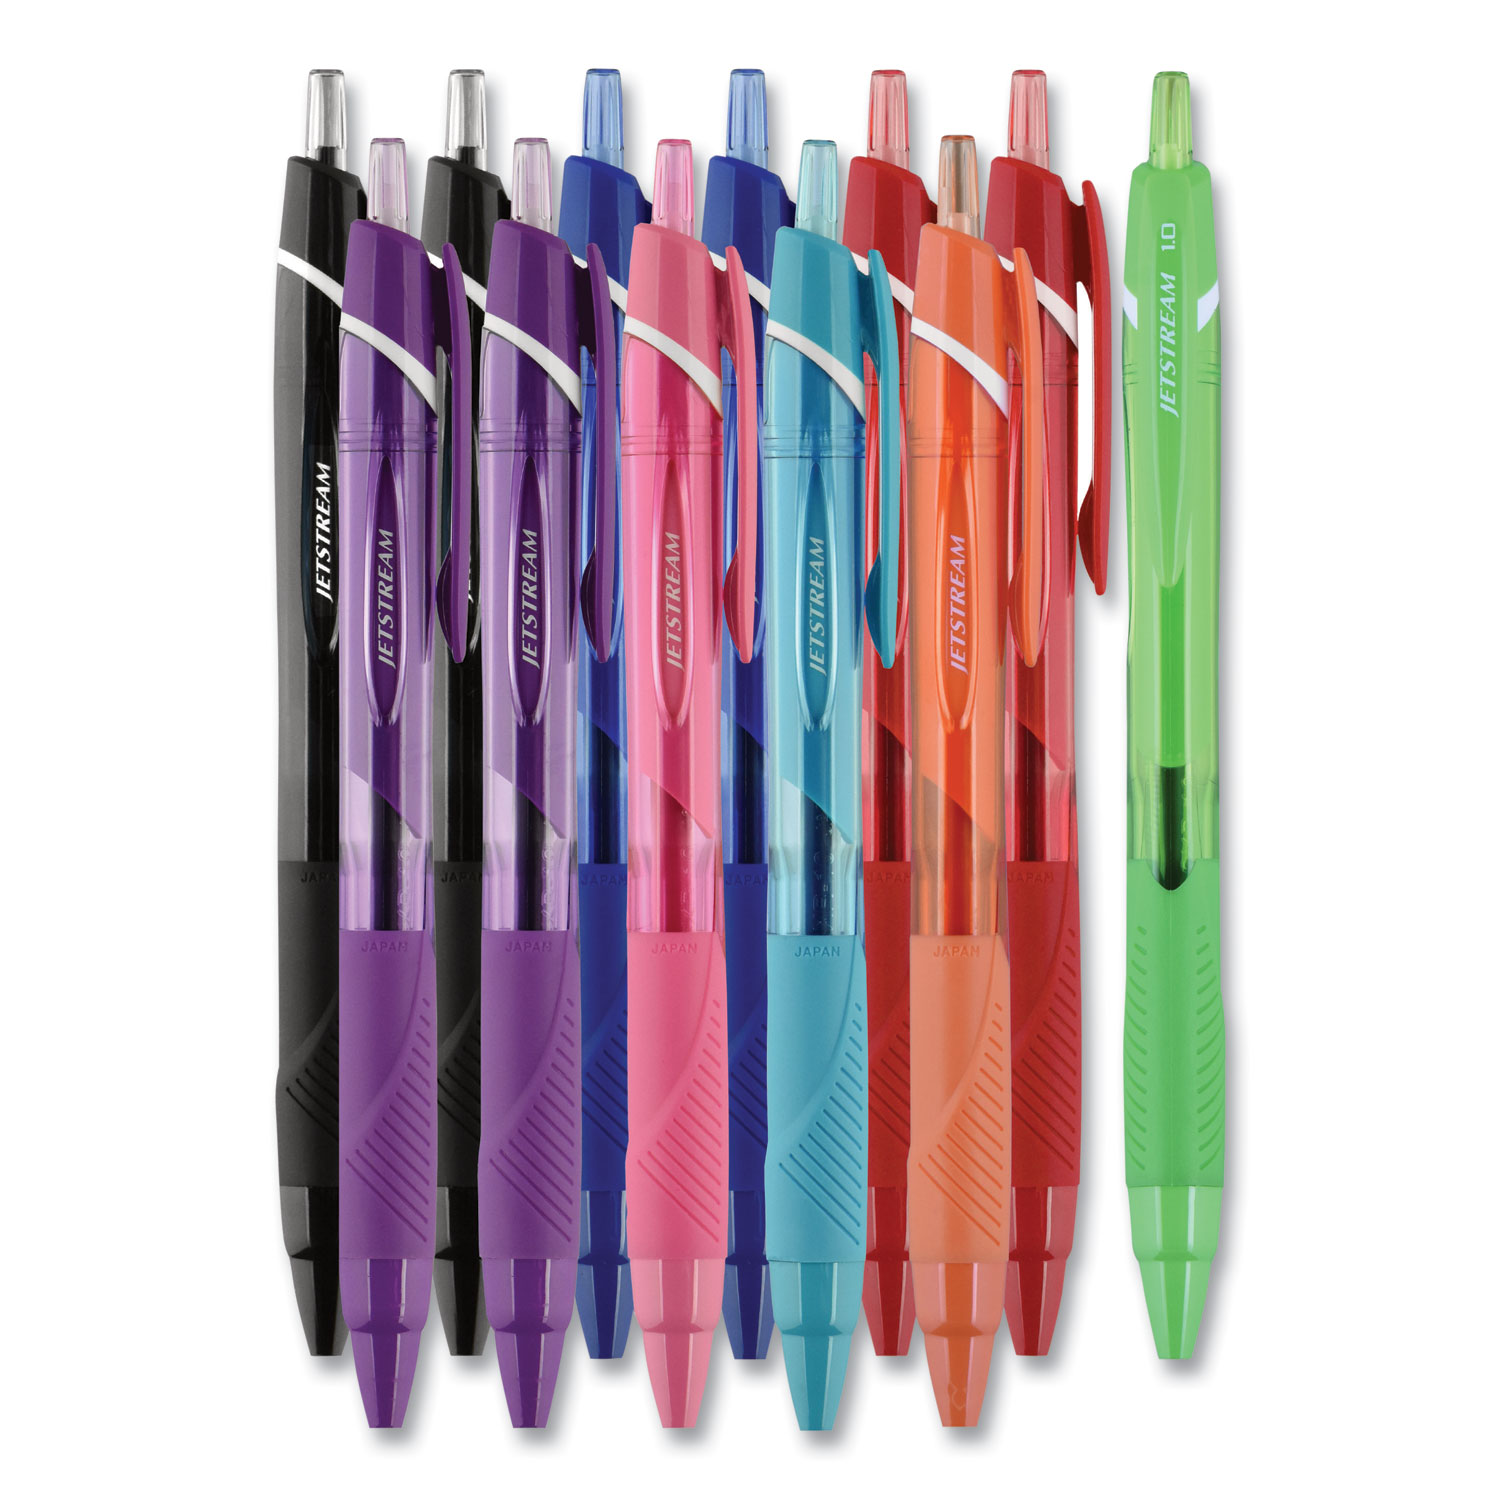 Uni-Ball Gel Pen, Stick, Assorted Sizes, Assorted Ink Colors, Clear Barrel, 24/Pack